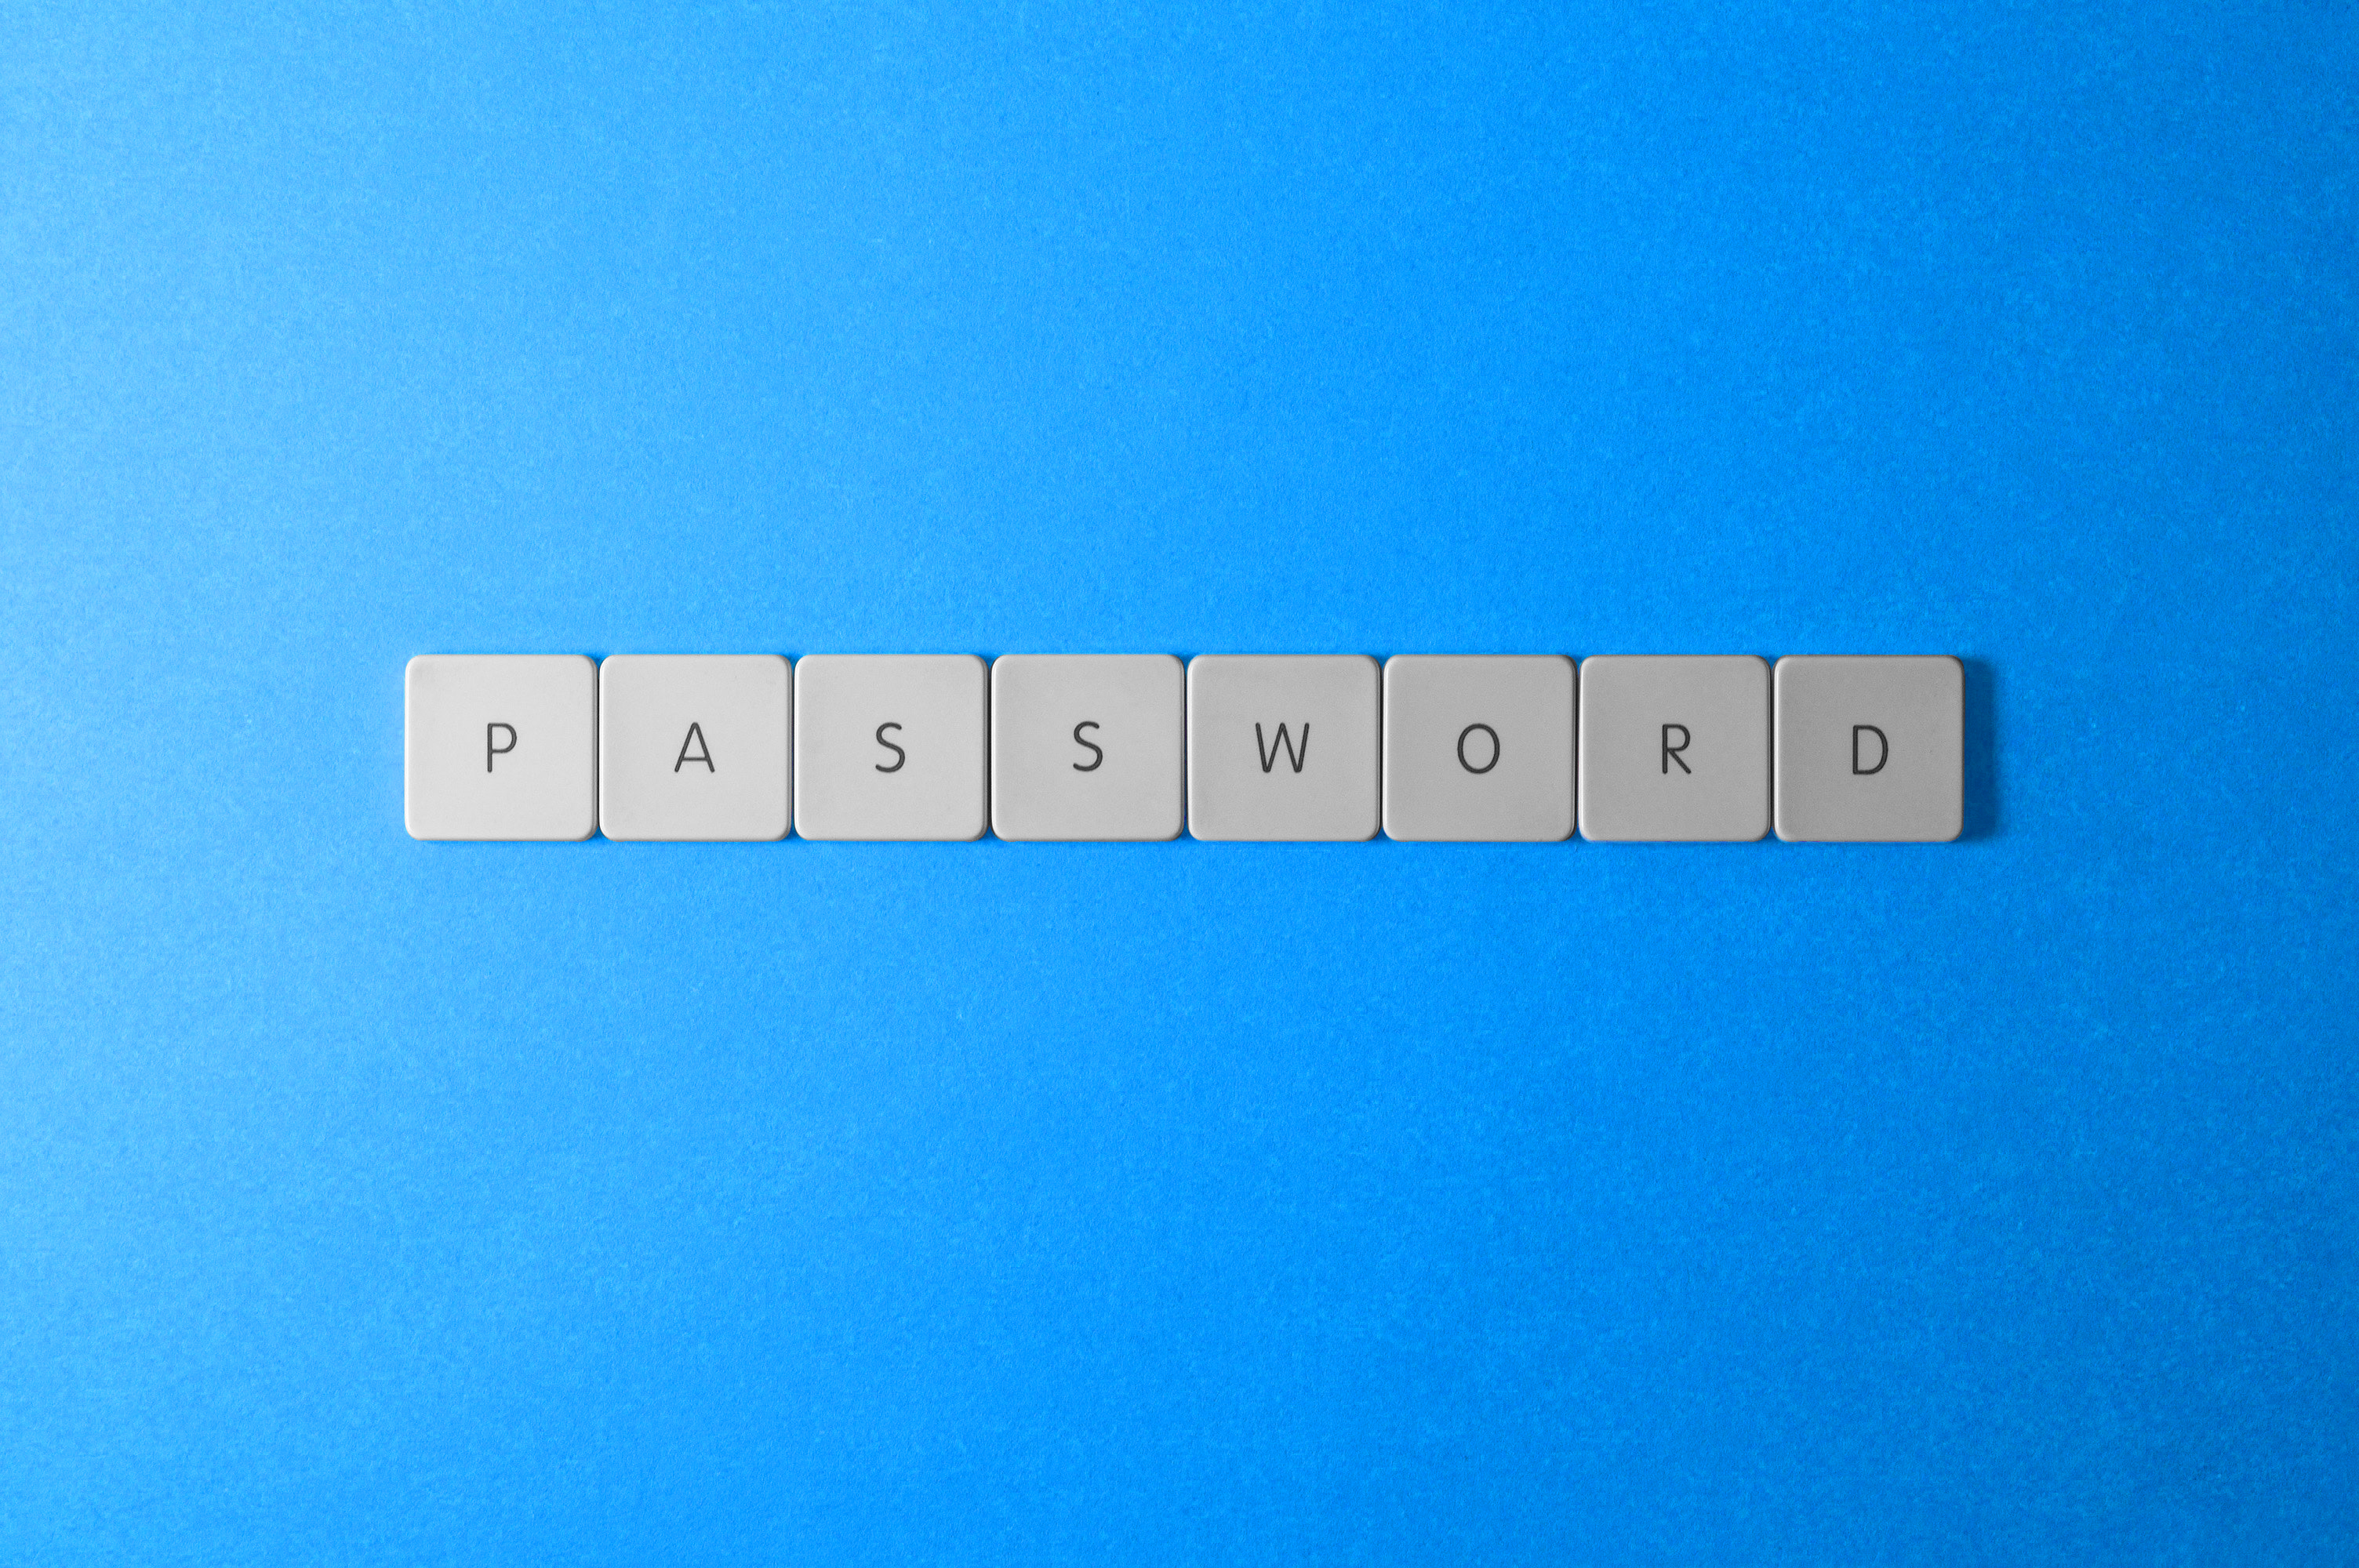 password spelled out in keys